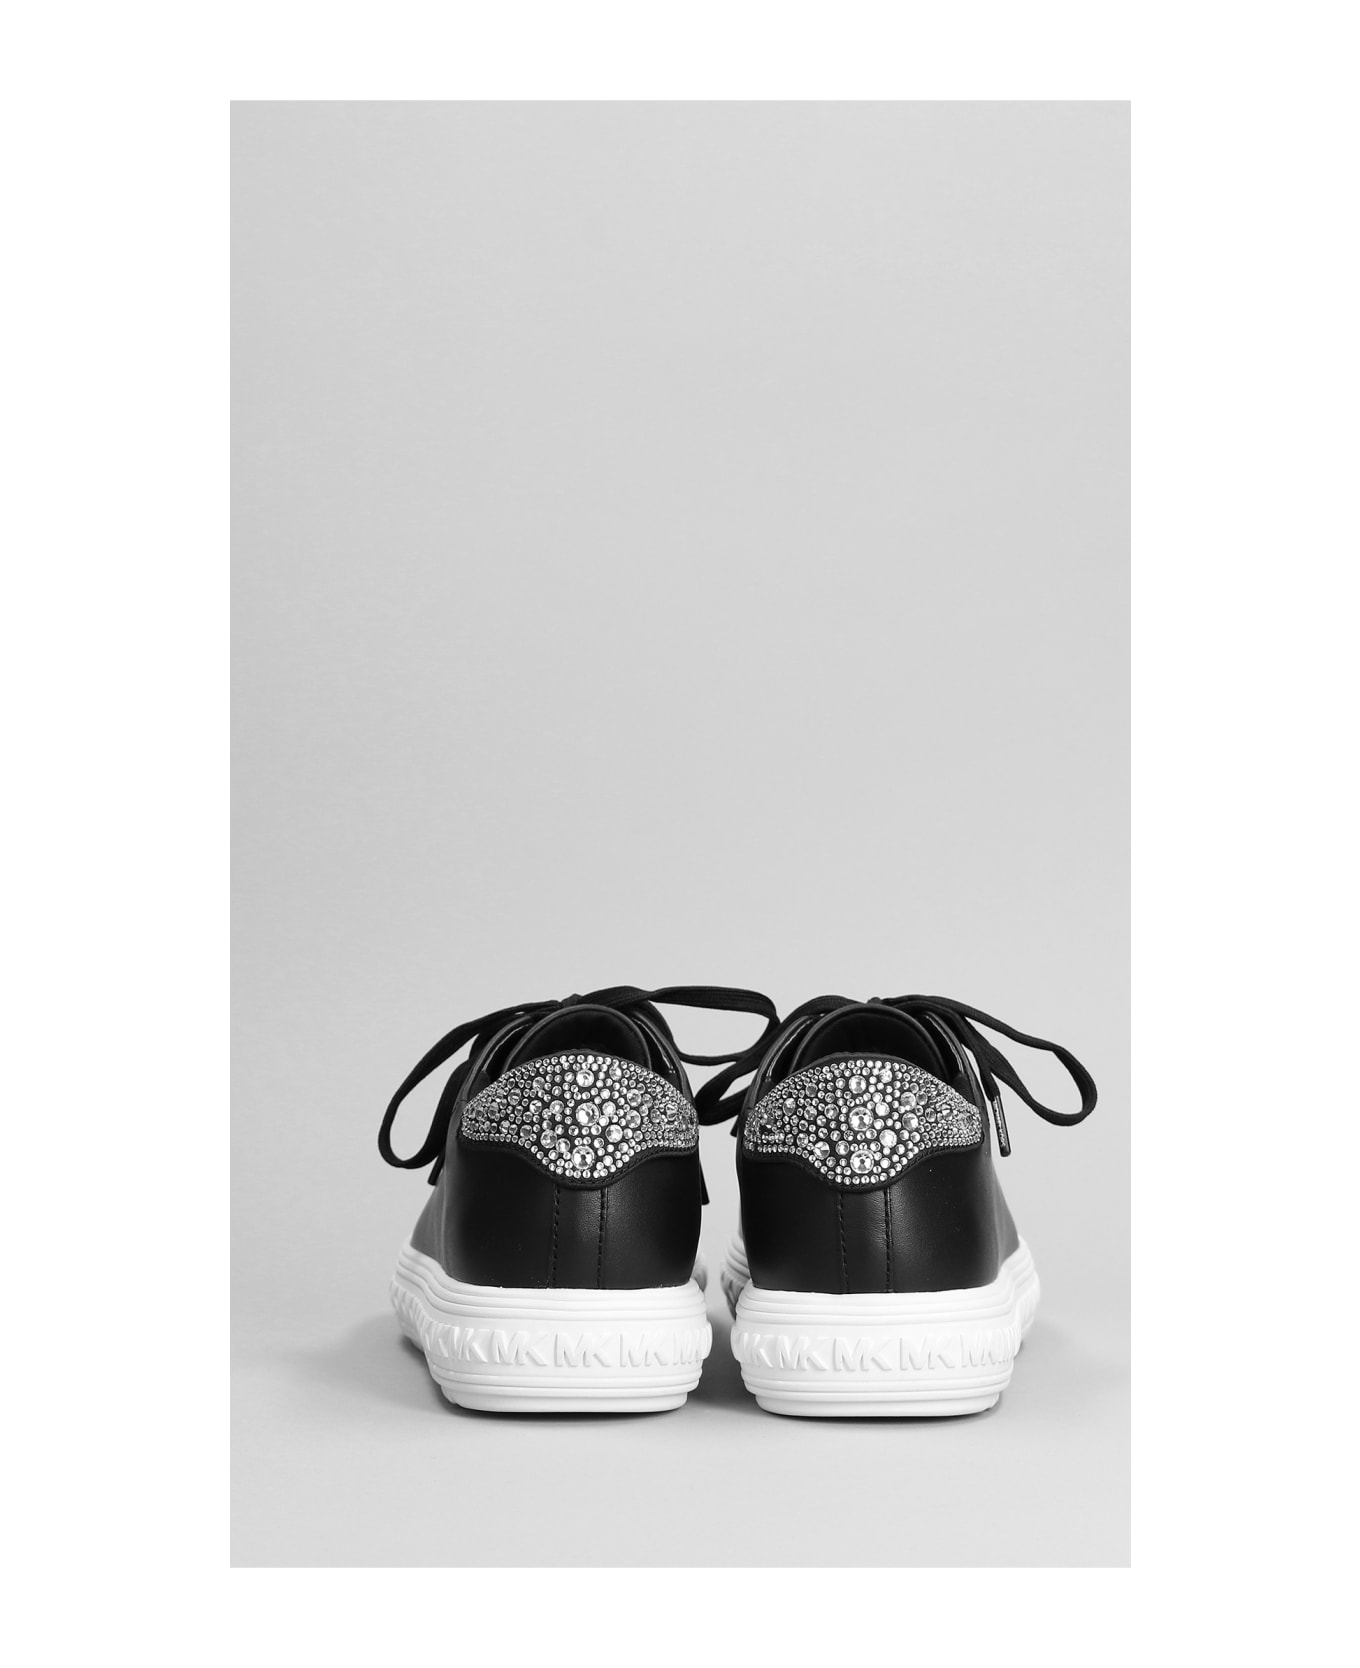 Michael Kors Grove Lake Up Sneakers In Black Leather And Fabric - black スニーカー